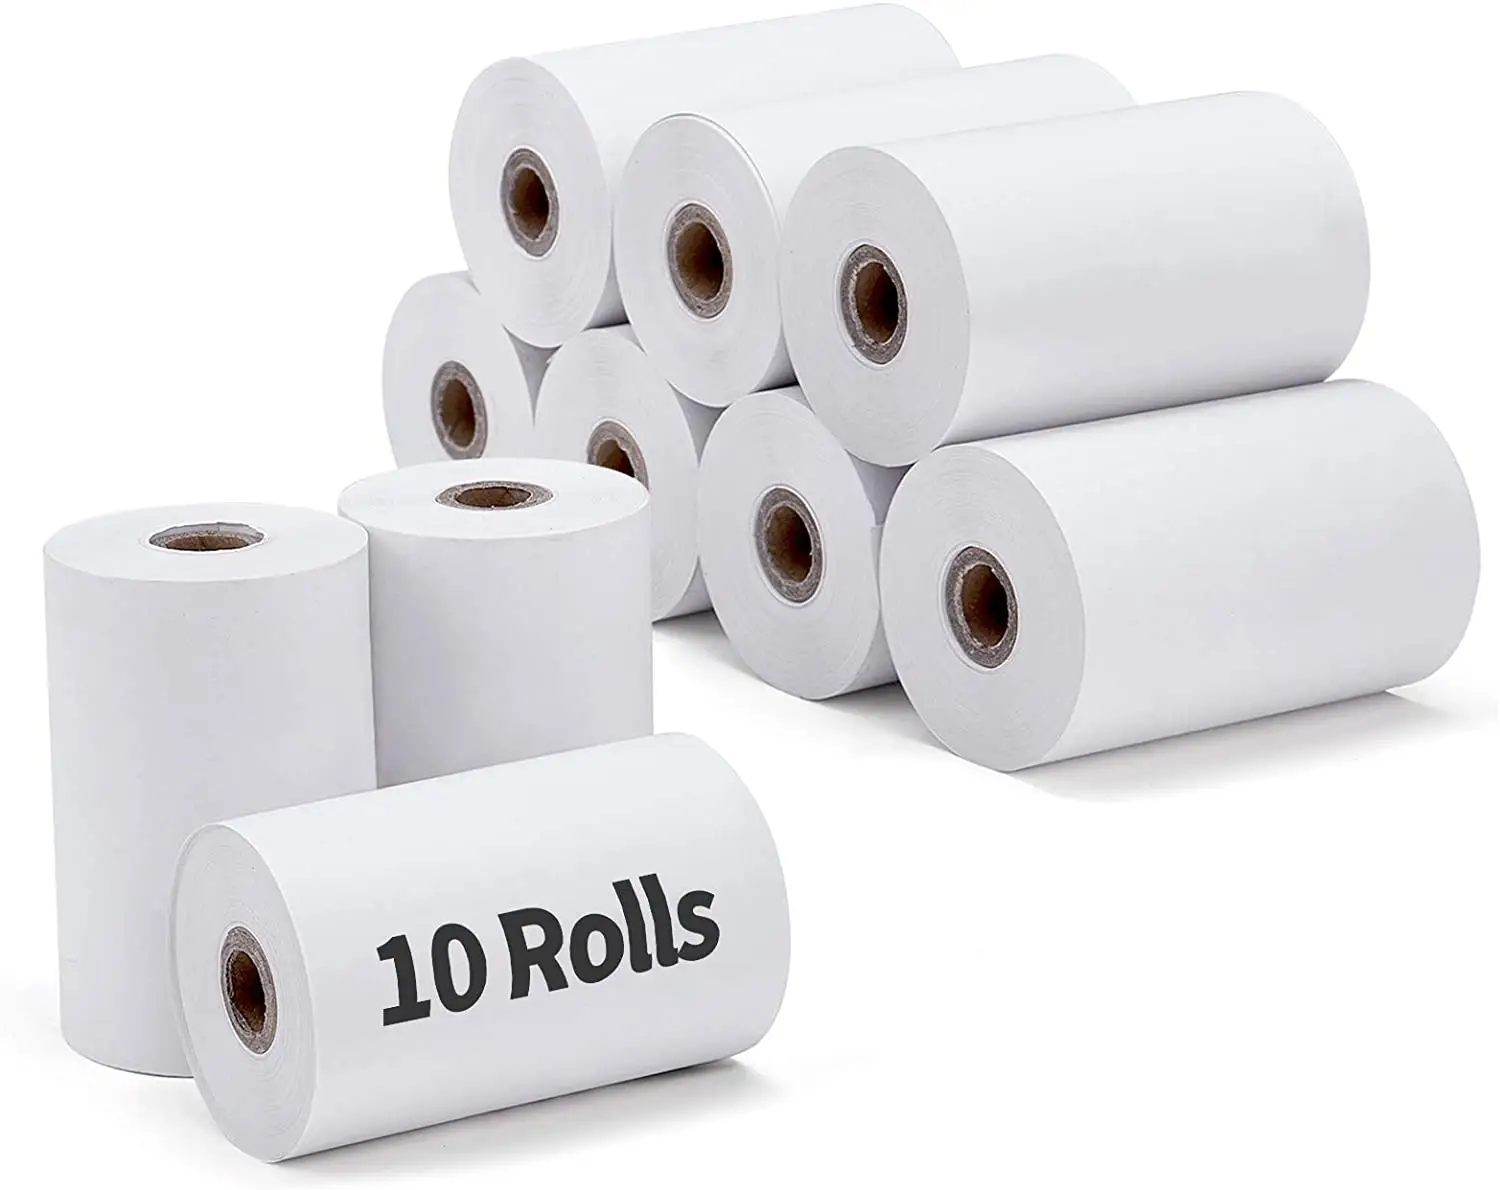 Mufeng Thermal Paper, 3 1/8" x 52.4' Receipt Paper, Thermal Paper Roll for 80mm POS Thermal Printer Cash Register Rolls